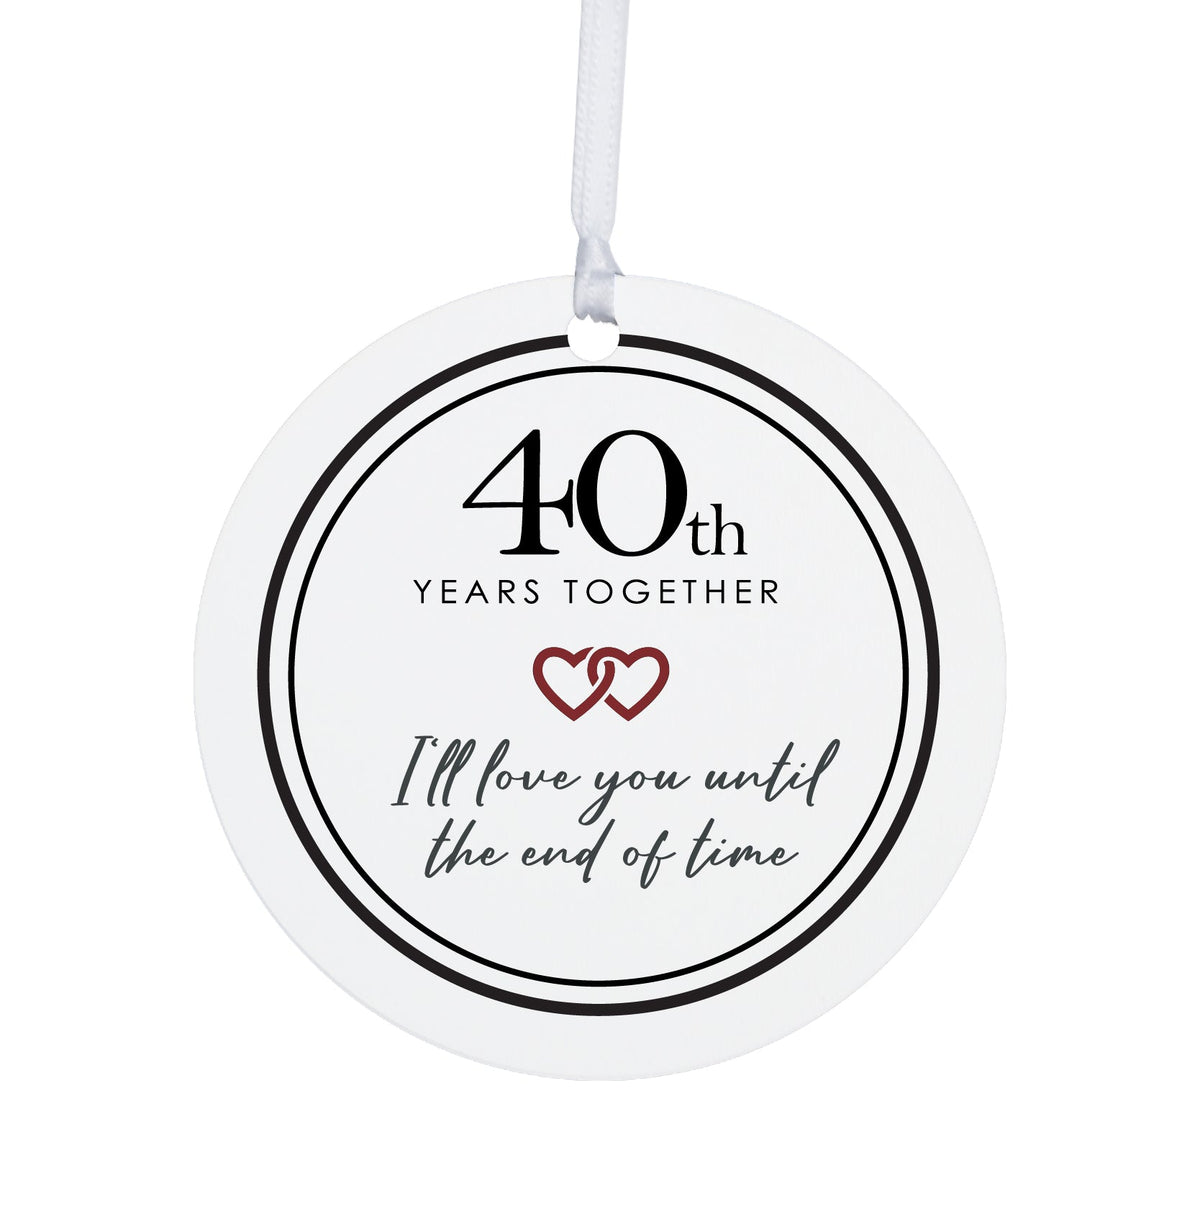 40th-Year Together Wedding Anniversary White Ornament With Inspirational Message Gift Ideas - I Love You Till The End Of Time